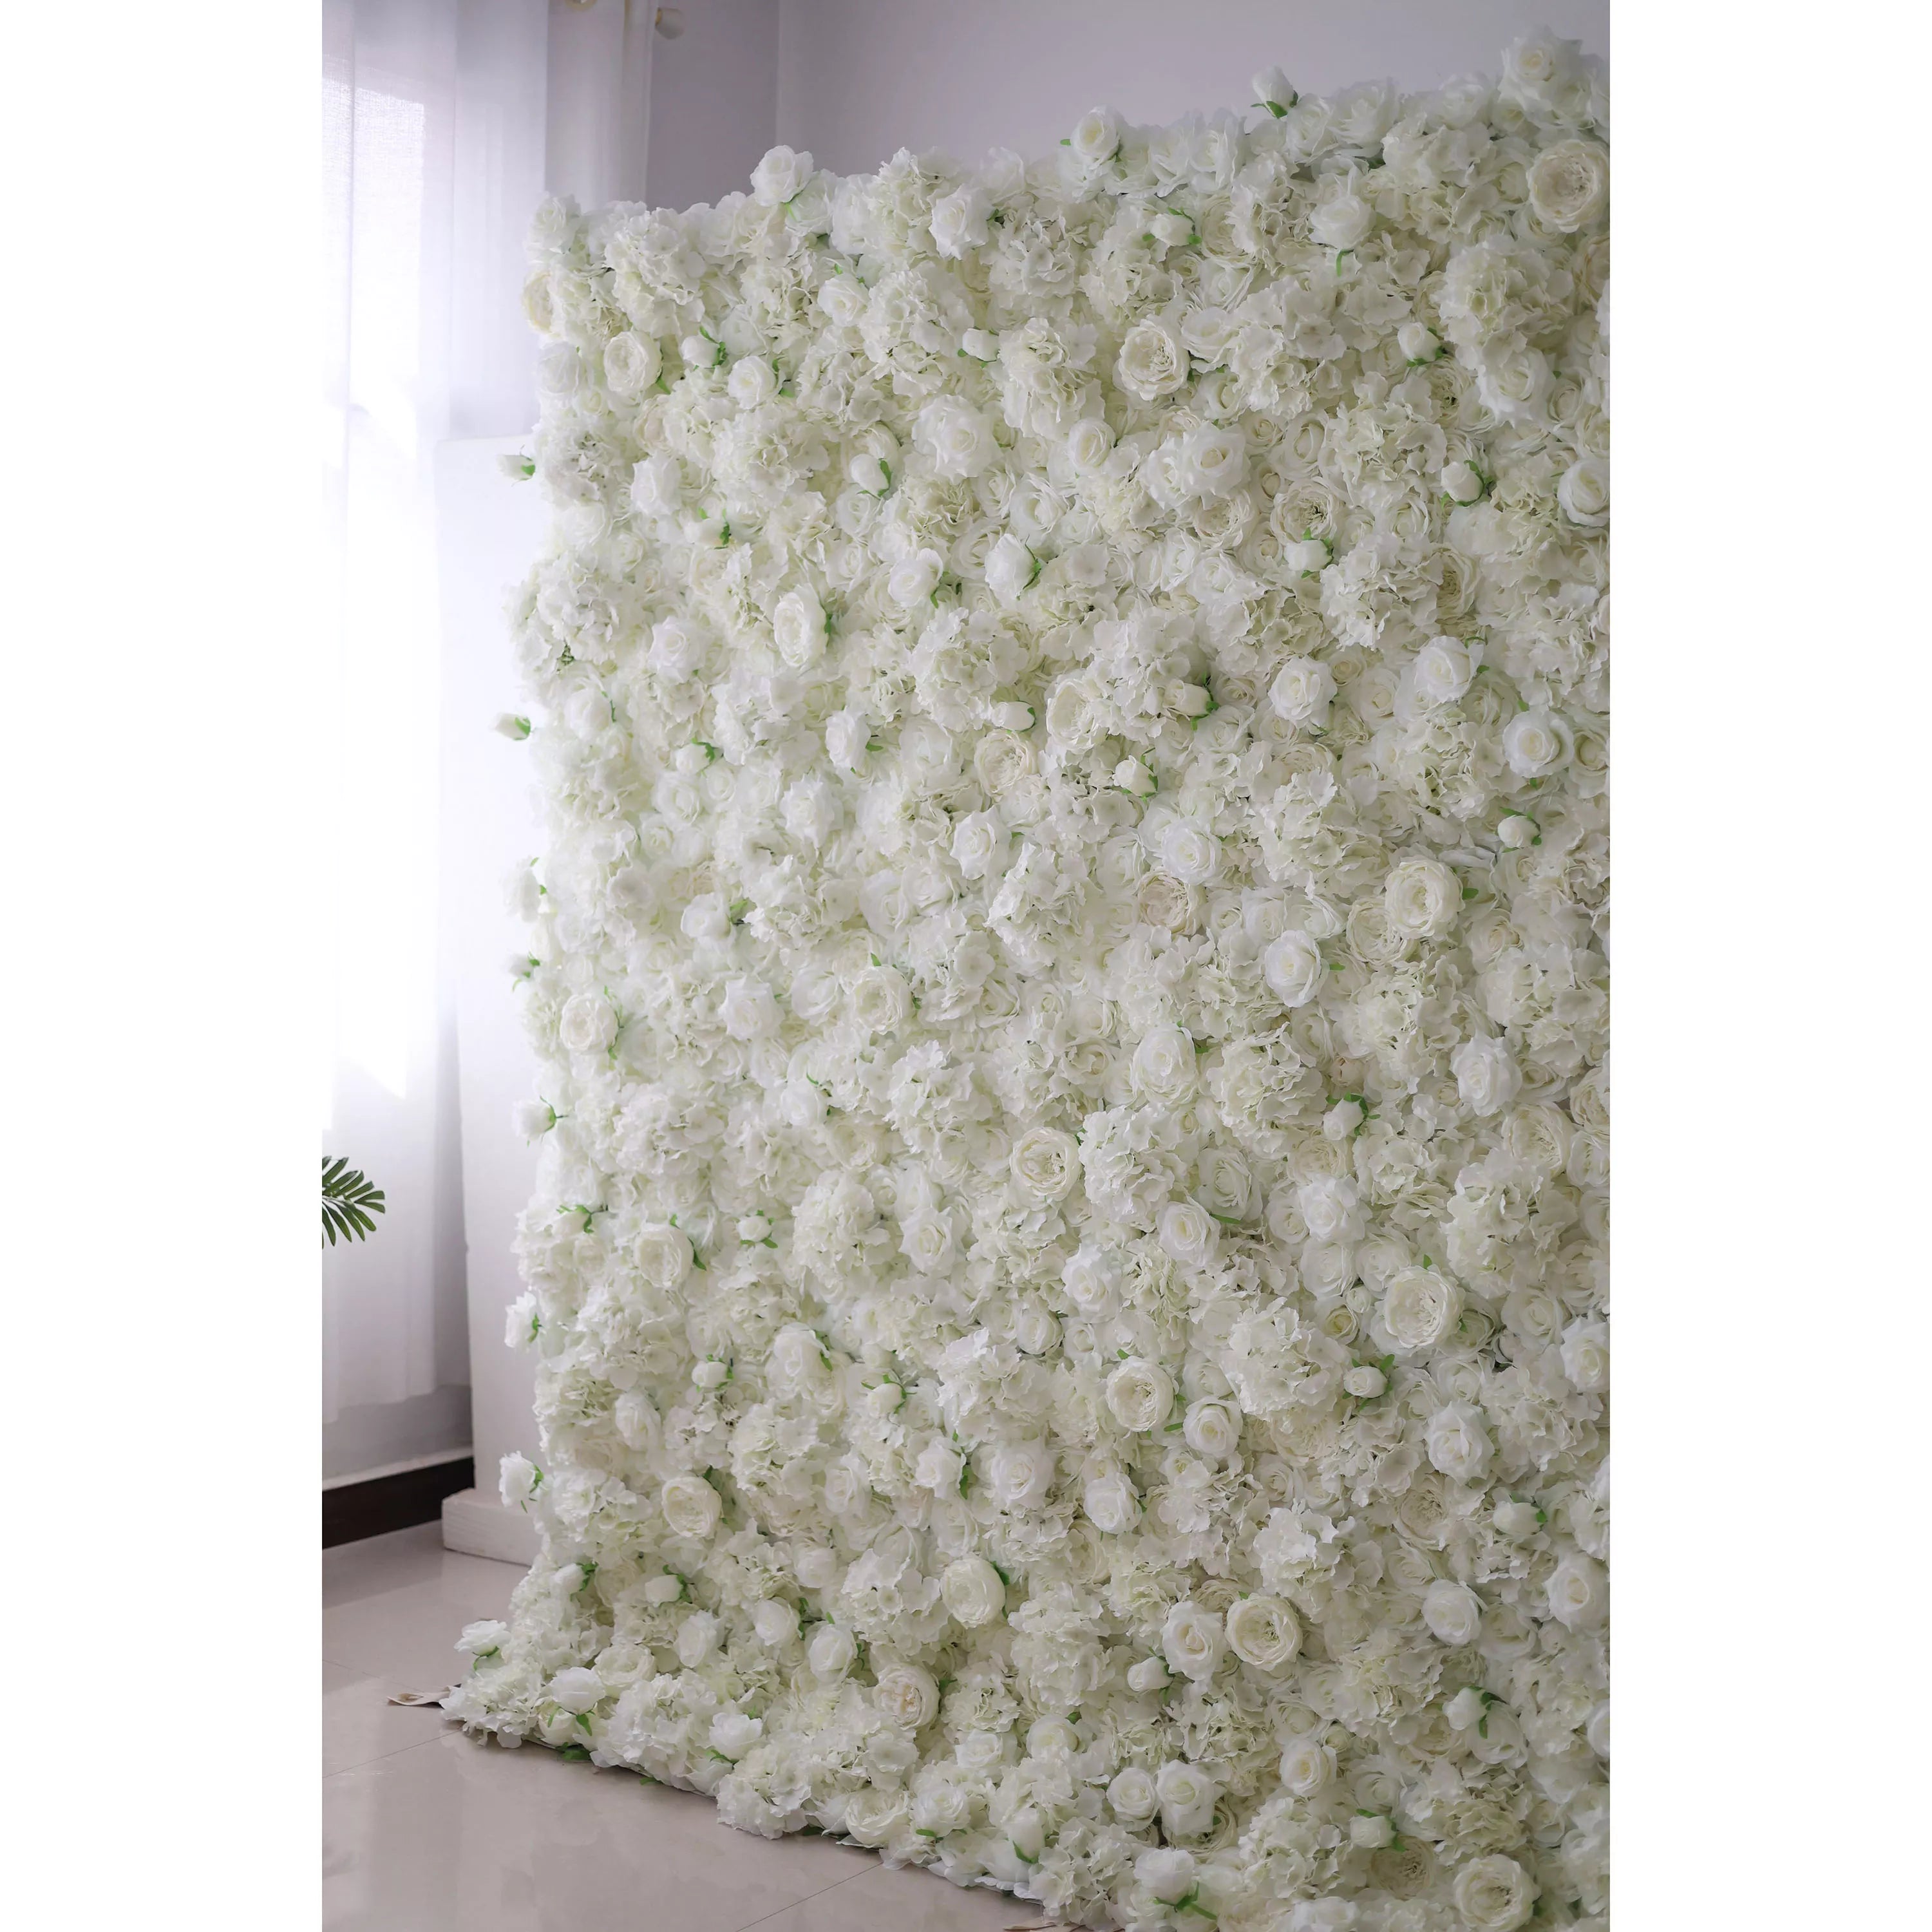 Valar Flowers' Artificial Fabric Flower Wall: Ethereal White Elegance. Immerse in an ocean of pure white blossoms; a luxurious arrangement that epitomizes classic beauty and sophistication, perfect for events desiring grace and angelic radiance.